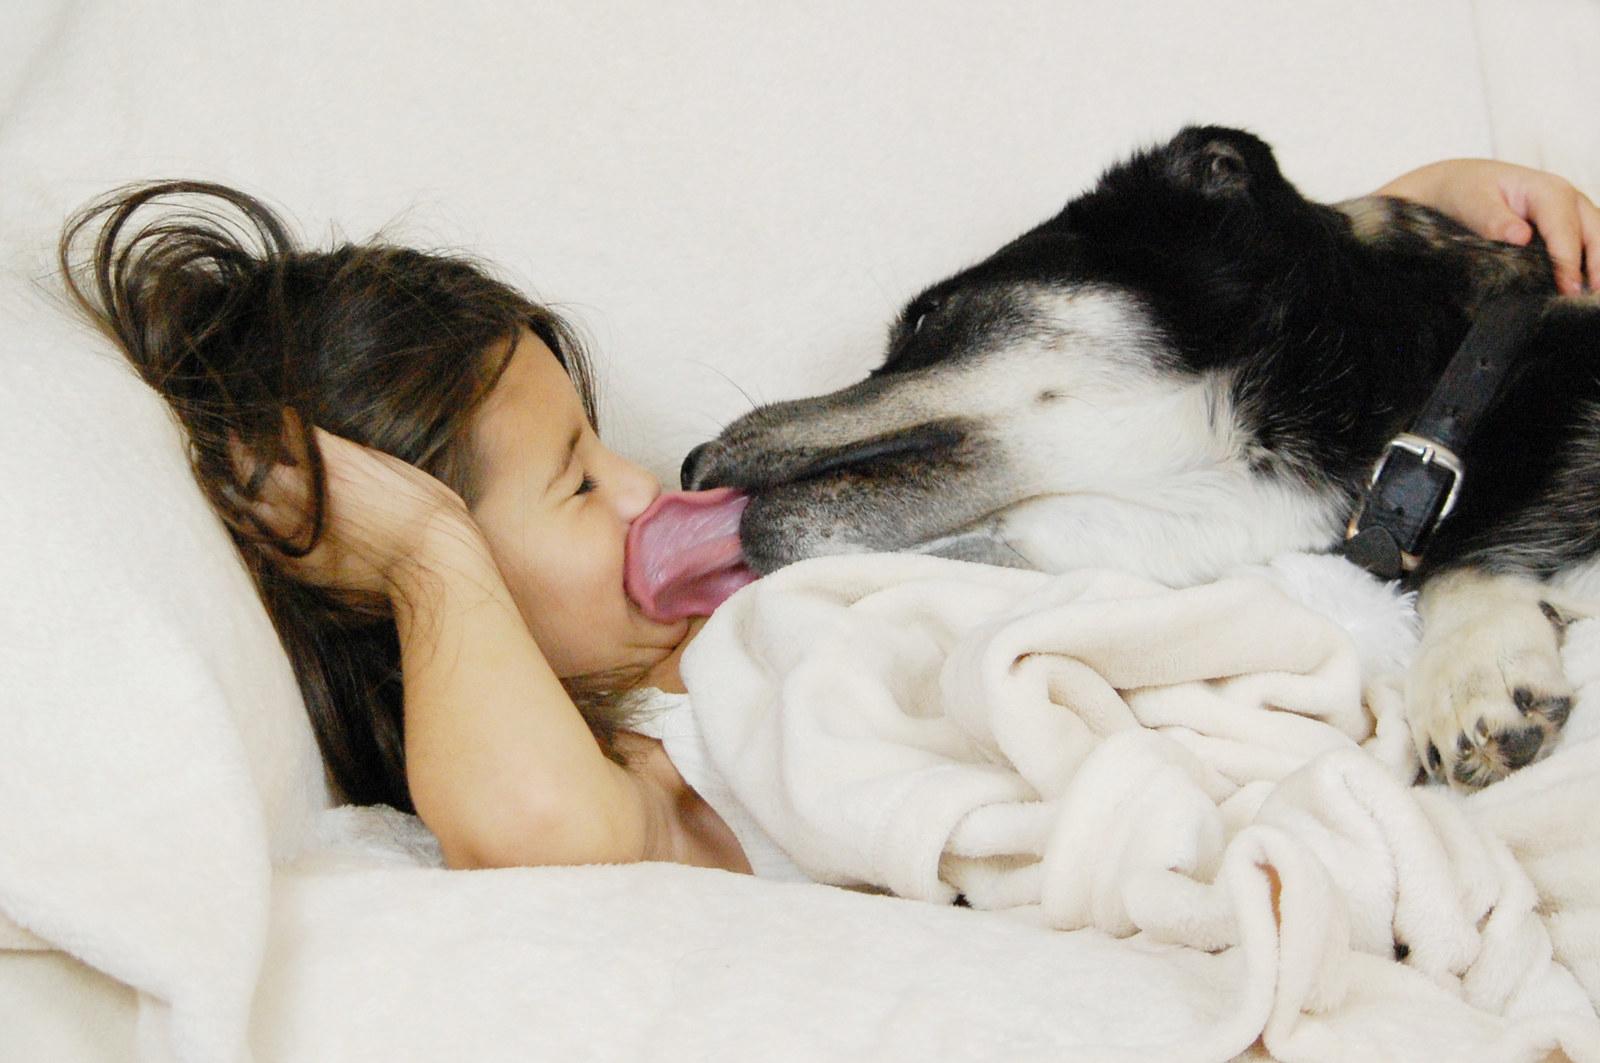 Here's Why You Shouldn't Let Your Dog Lick Your Face